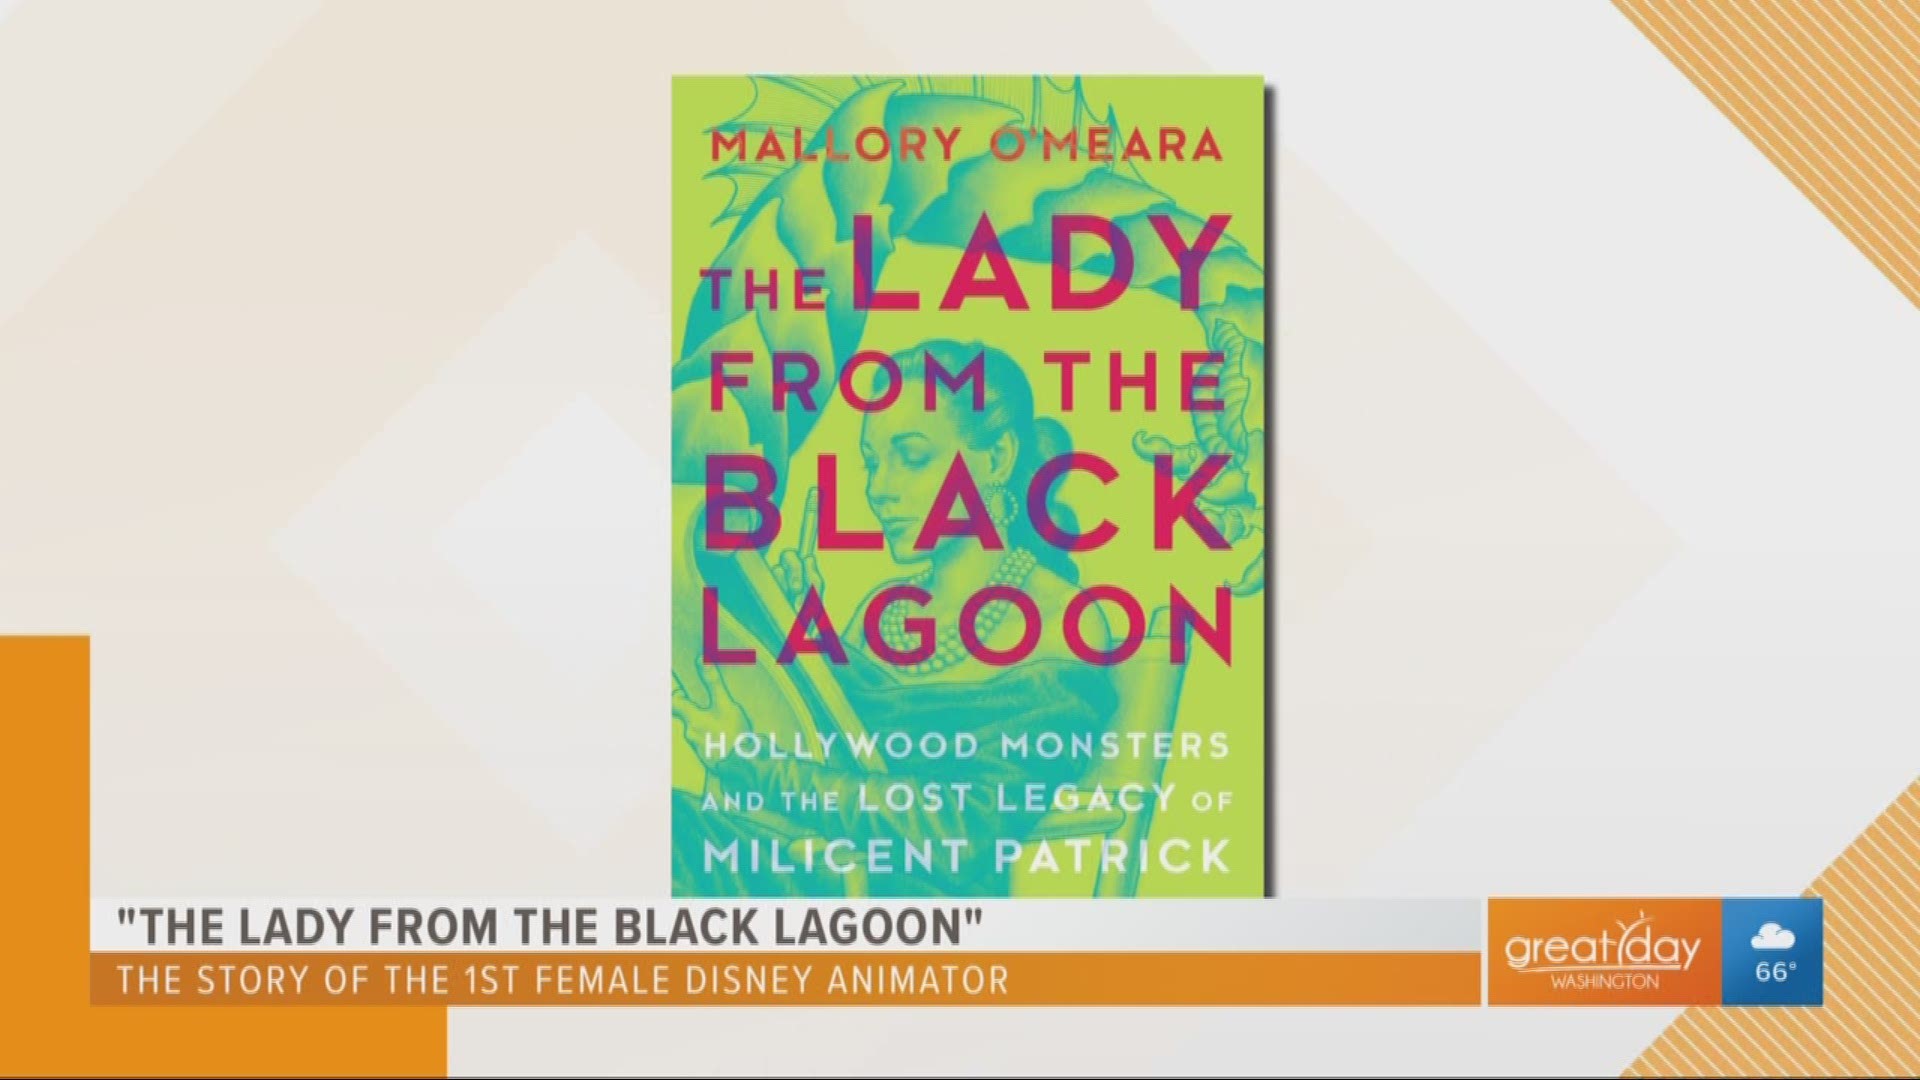 Author of the book "The Lady From The Lagoon" Mallory O’Meara discusses her book about Milicent Patrick, the first female animator at Disney.